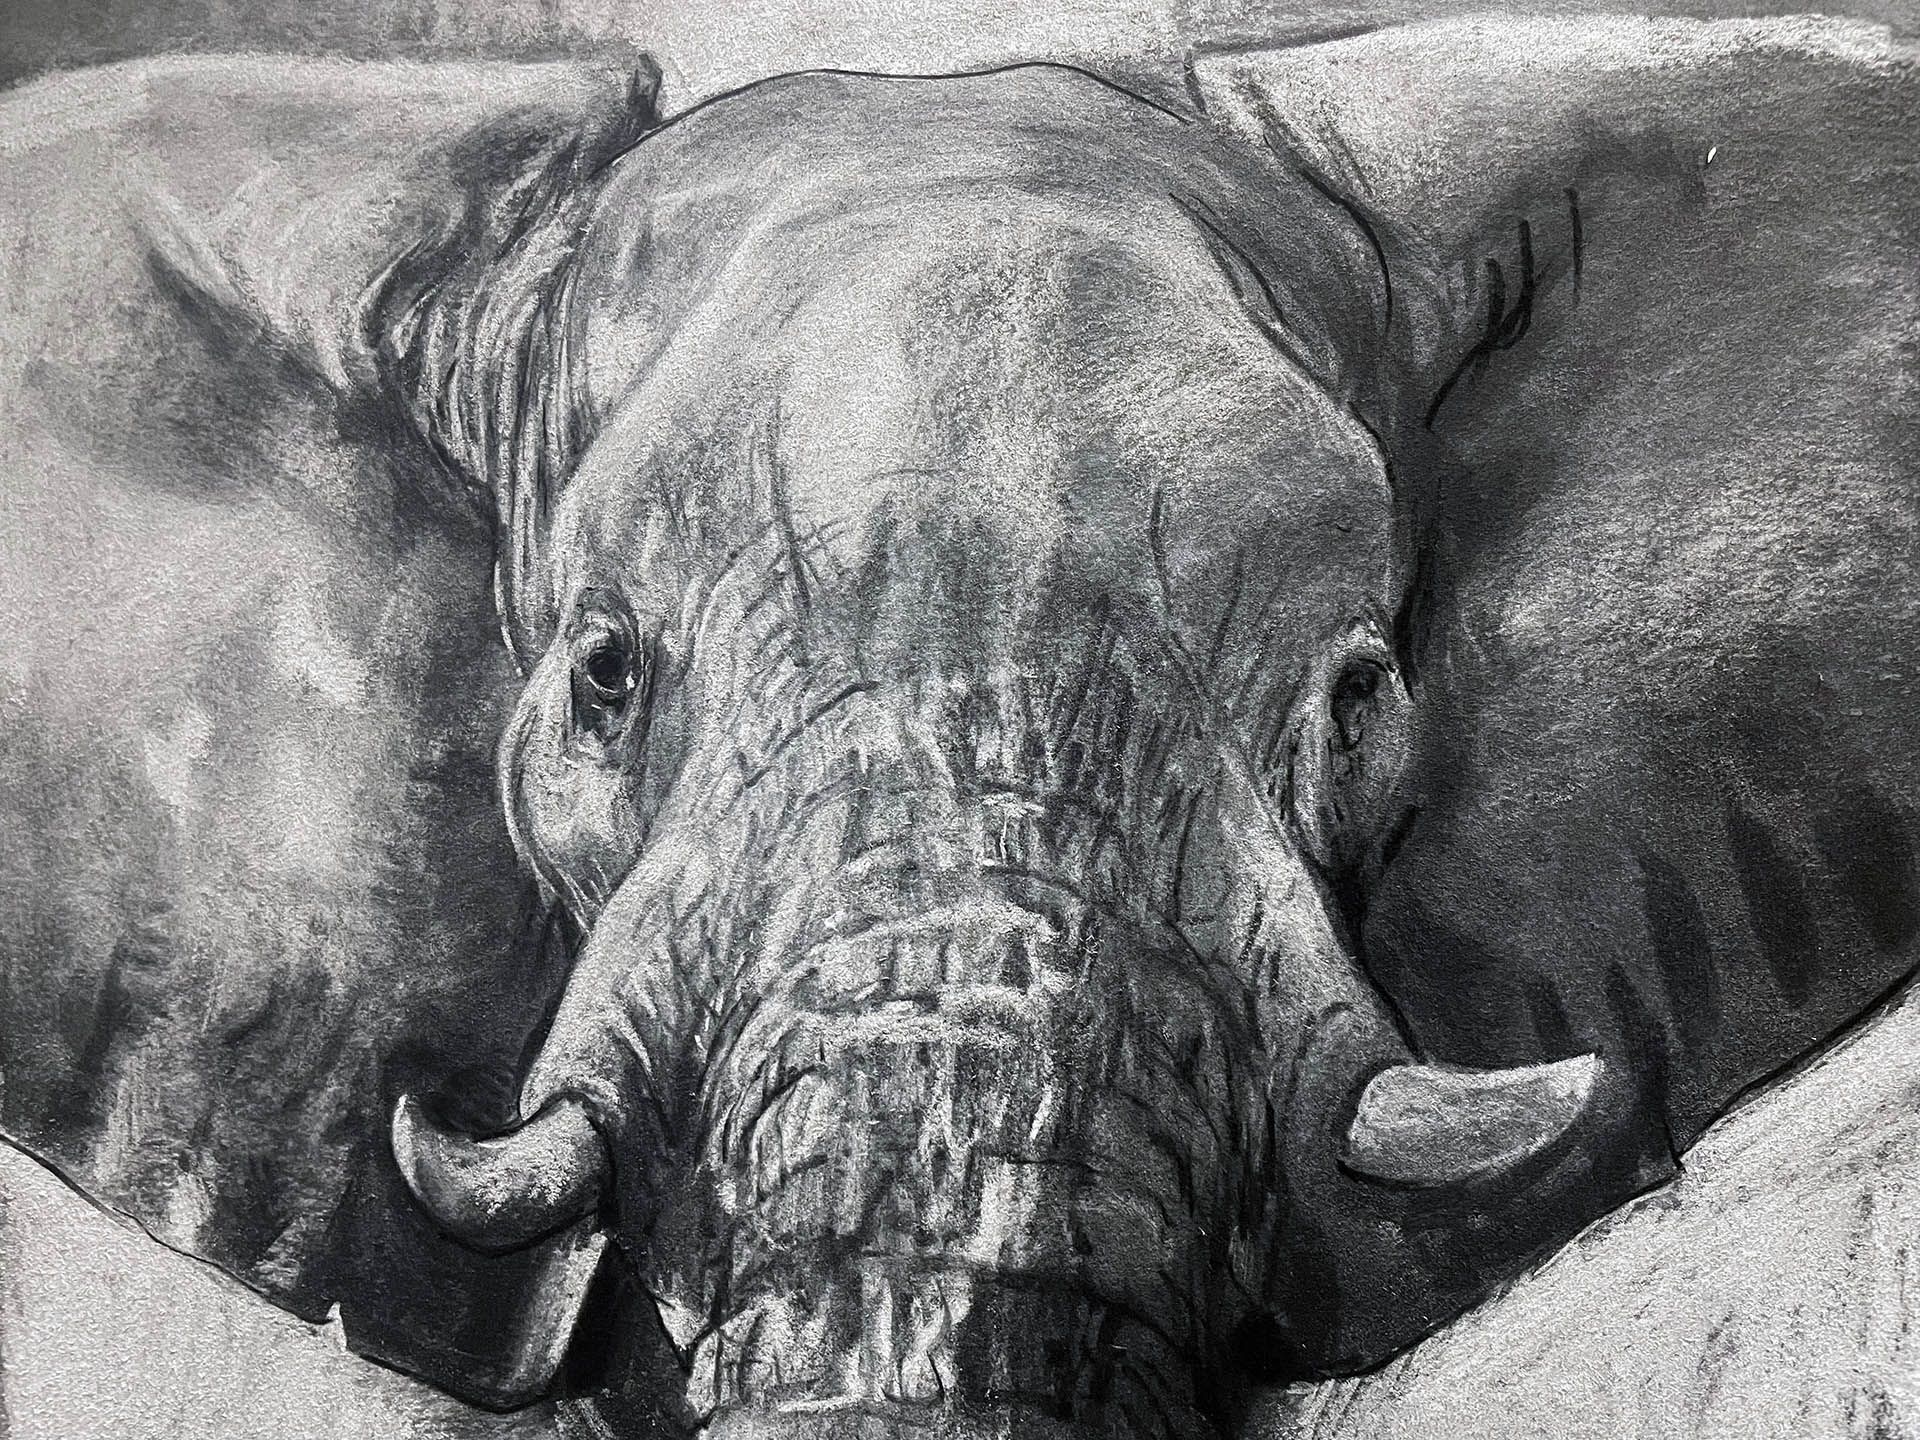 Indian Traditional Drawings and Paintings - Elephant Tradational Drawings...!!!  www.woodencarvings.in | Facebook